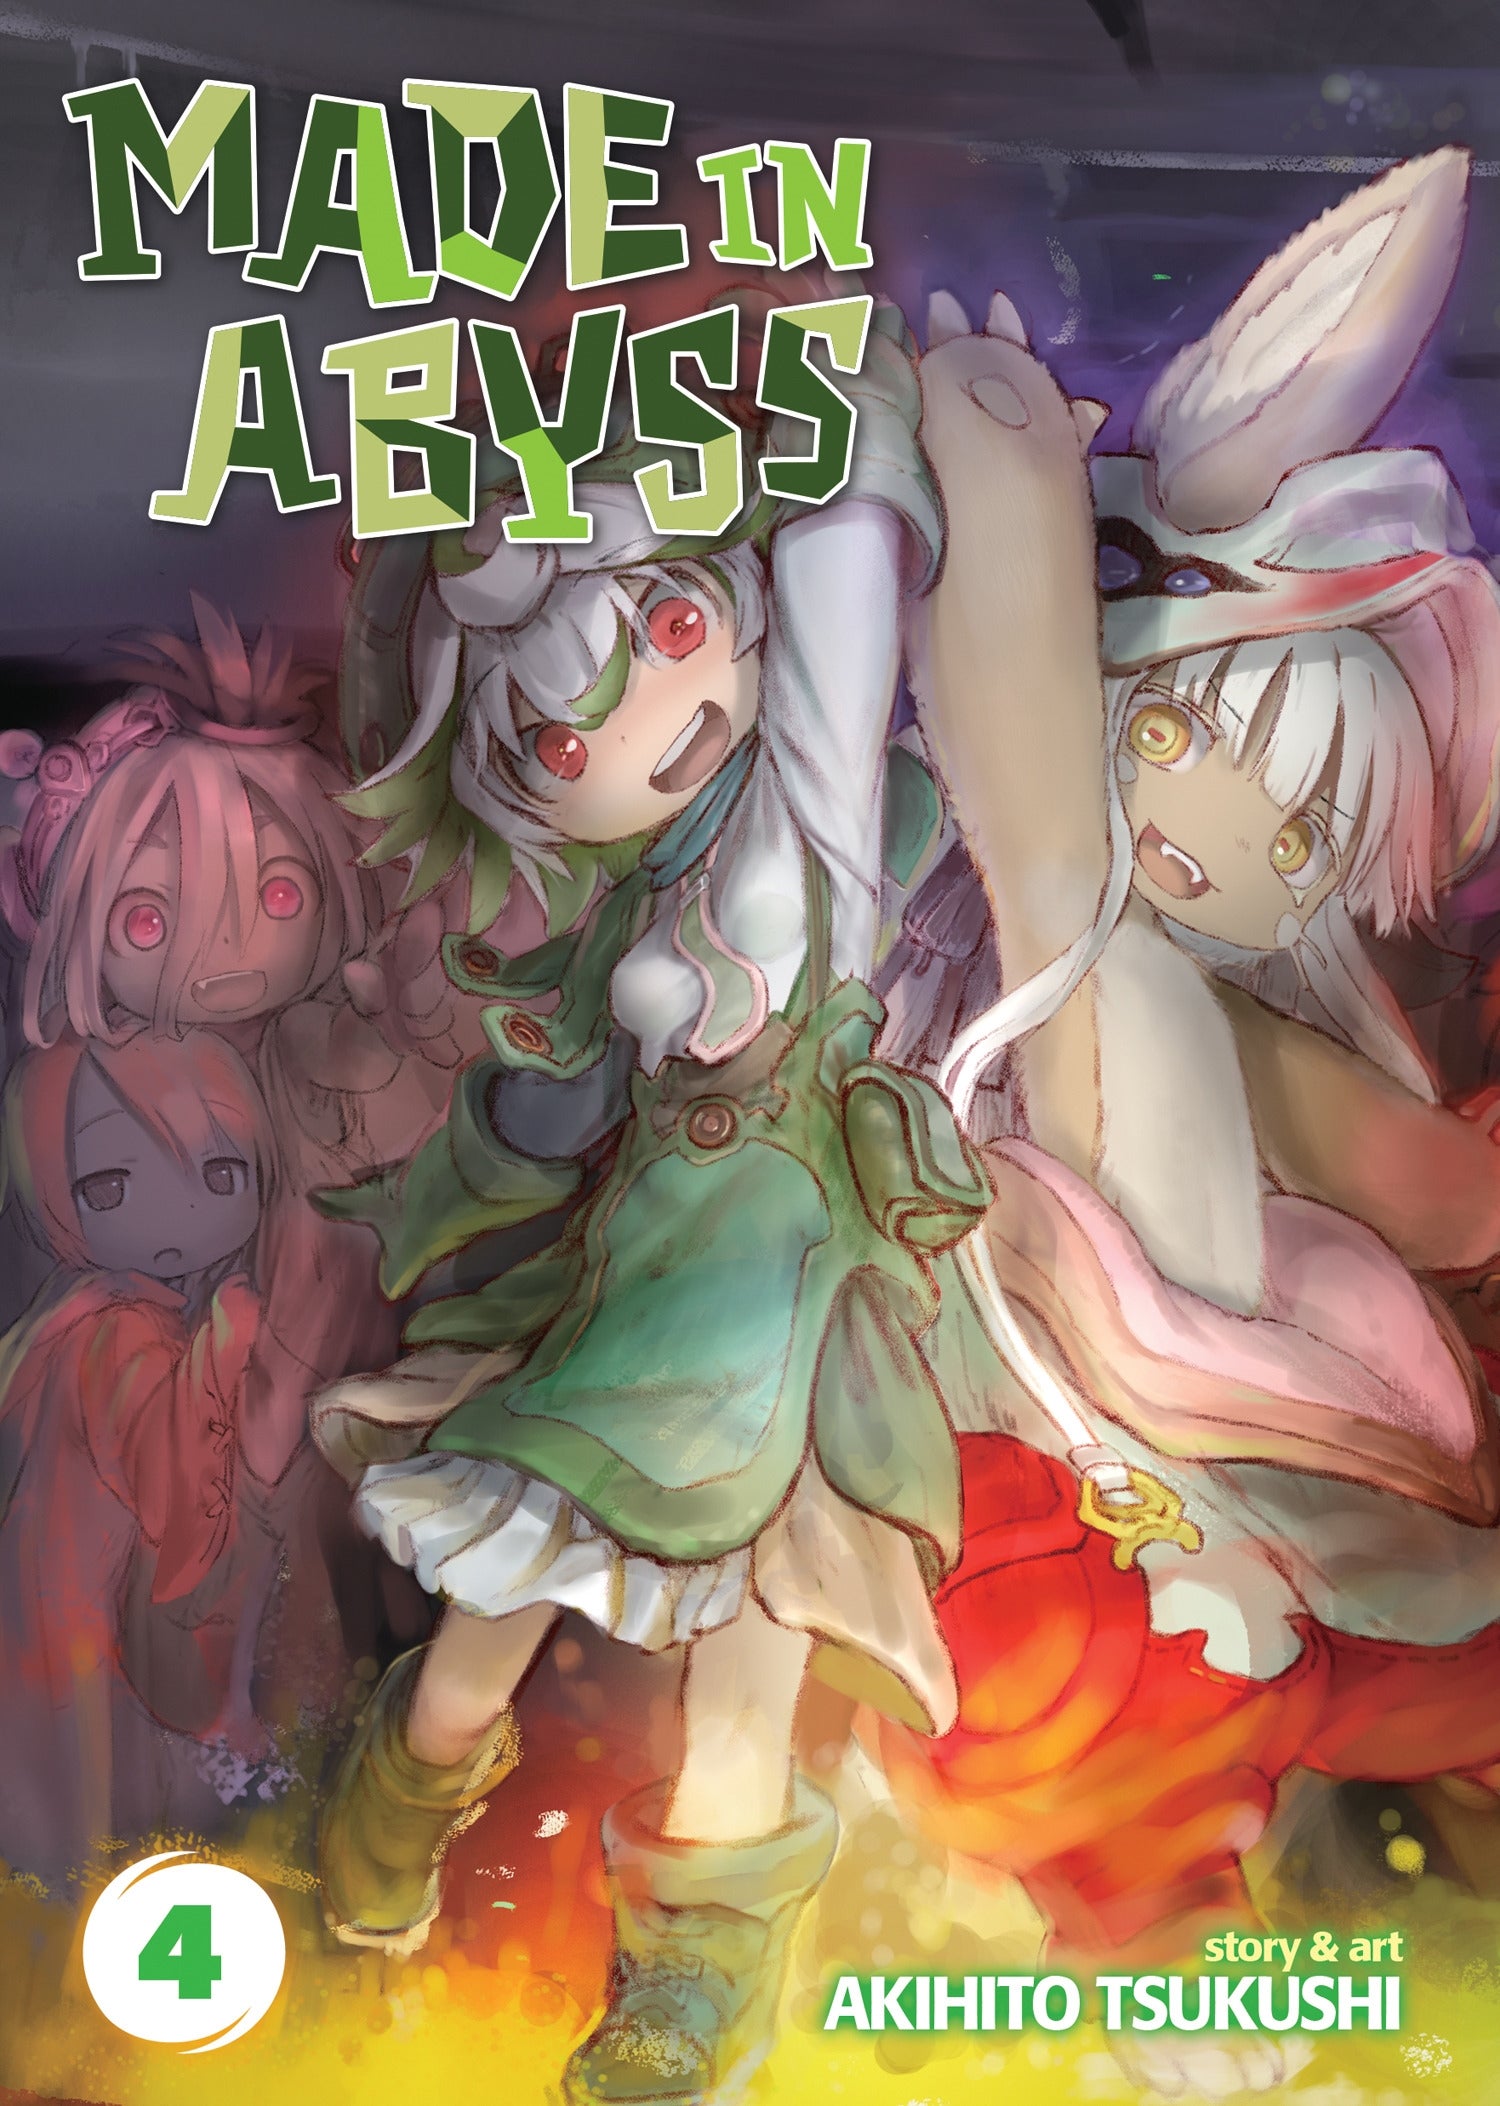 Made in Abyss Vol. 4 - Manga Warehouse